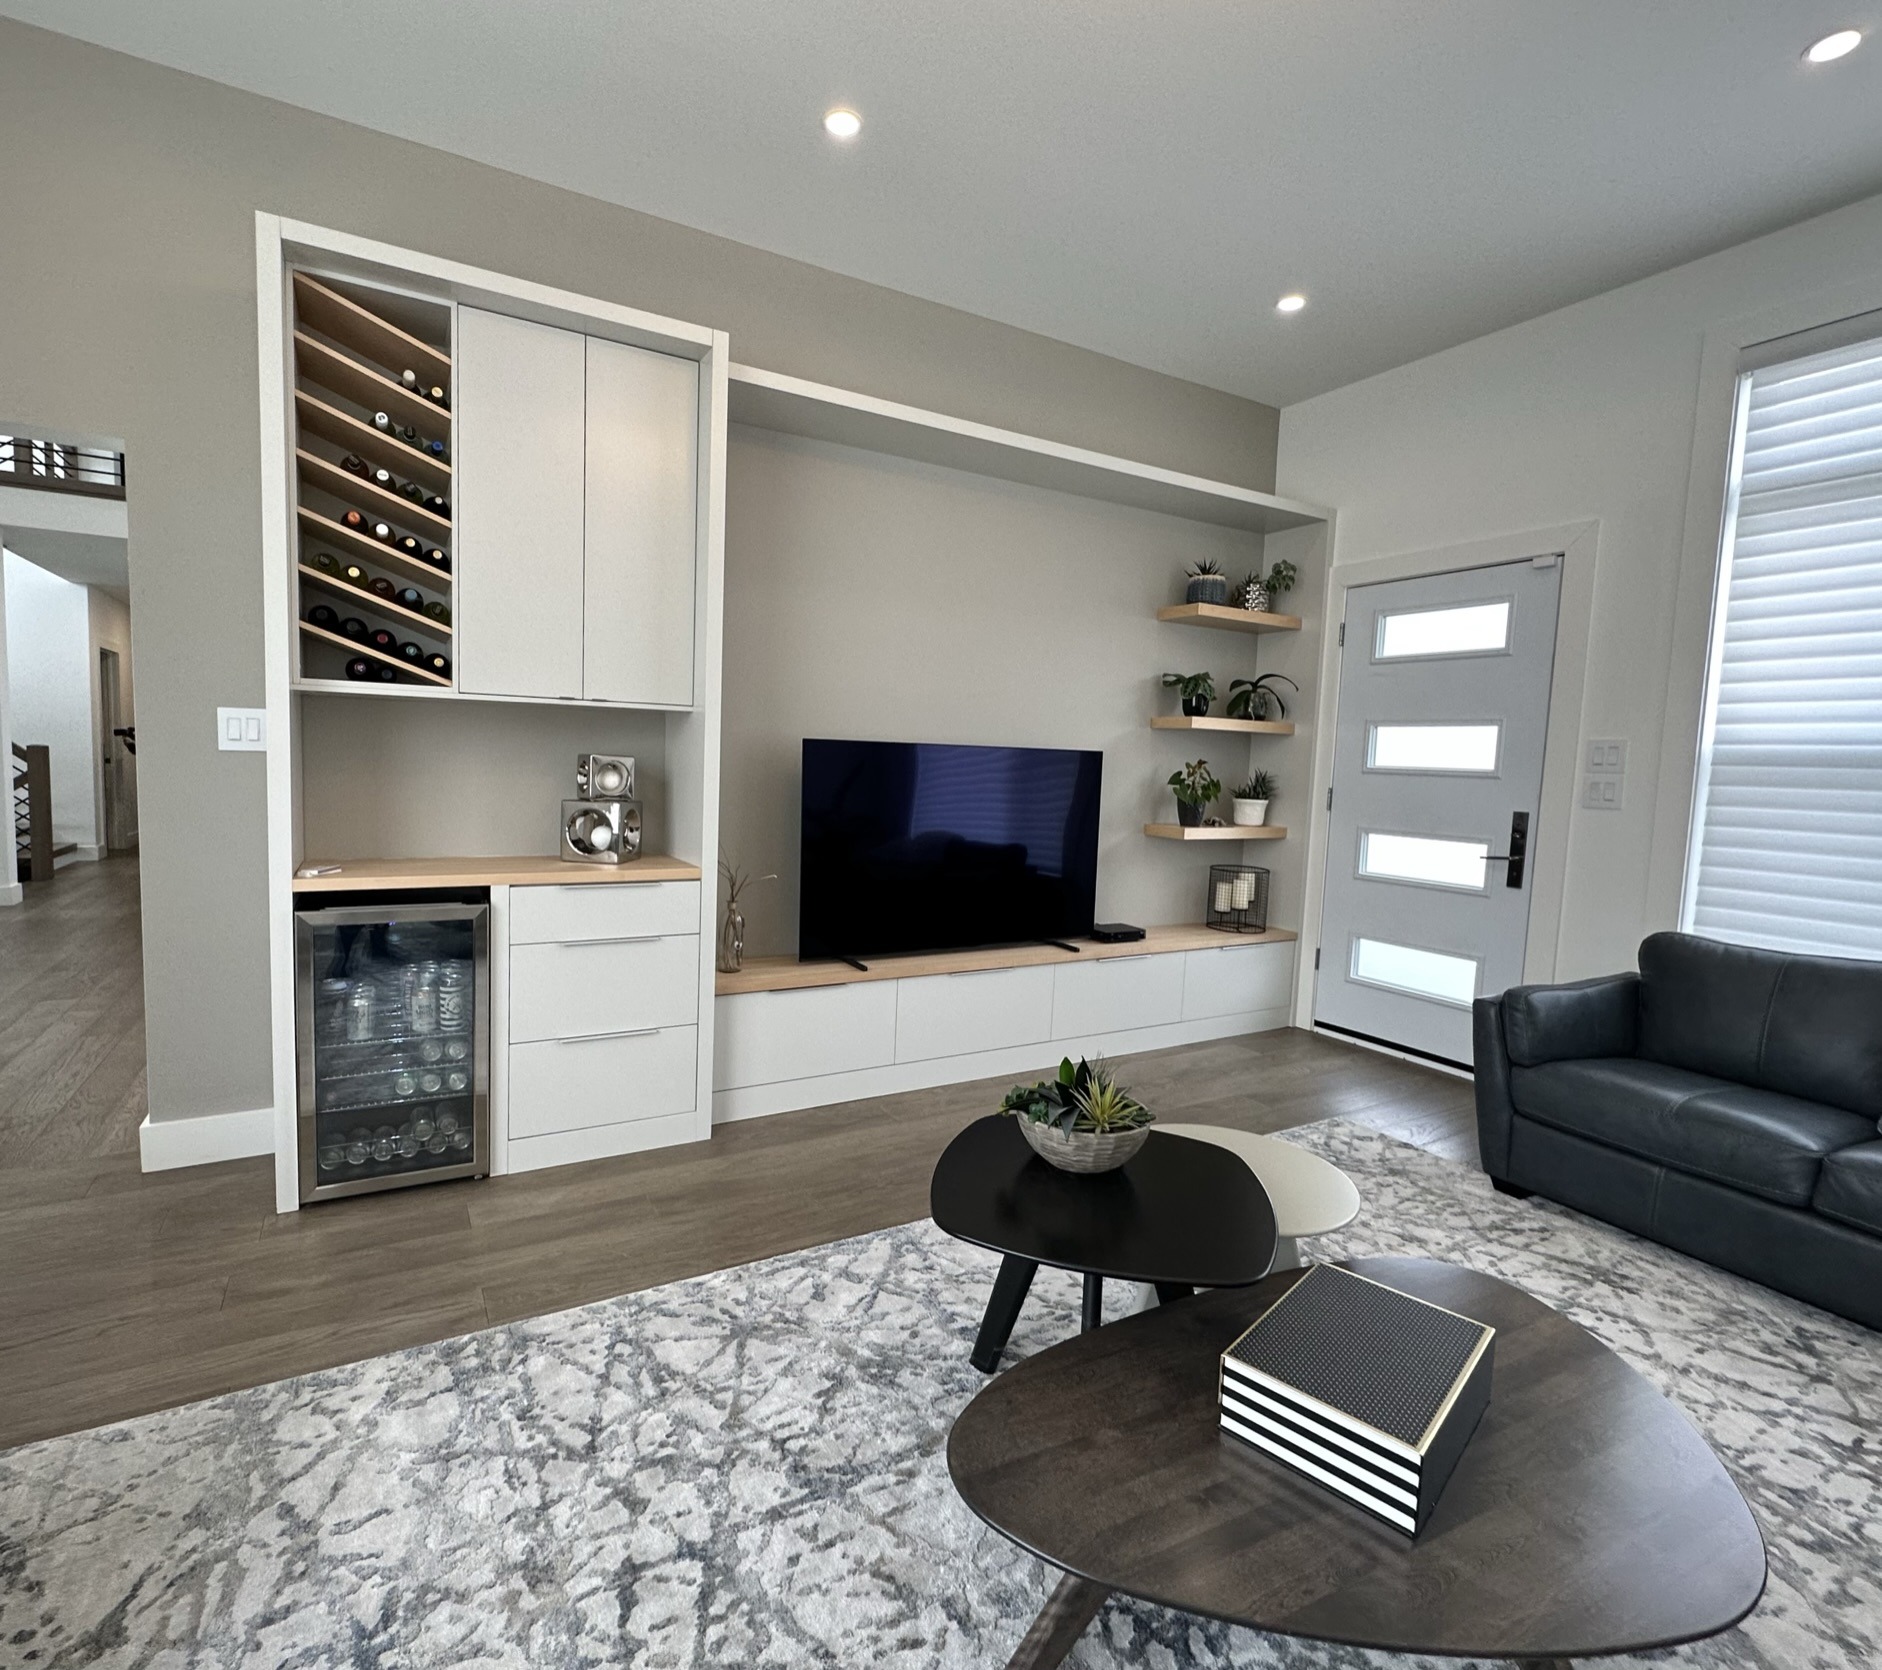 Modern living room with built-in white cabinetry, wine rack, beverage cooler, flat-screen TV, gray couch, decorative shelves, and a contemporary rug.